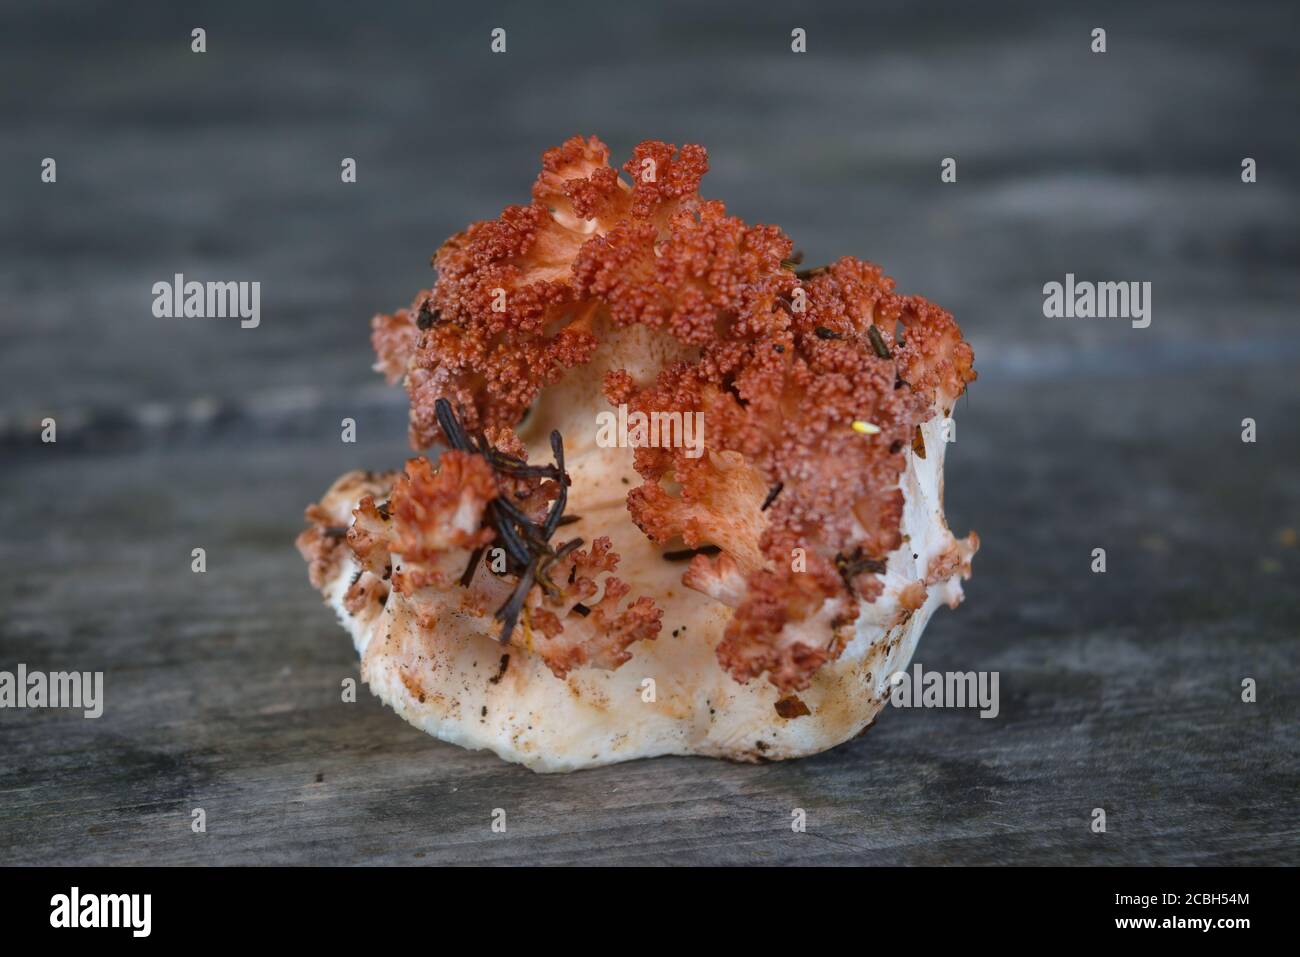 Edible mushroom Ramaria flava on the background of an old wooden table close-up. Stock Photo